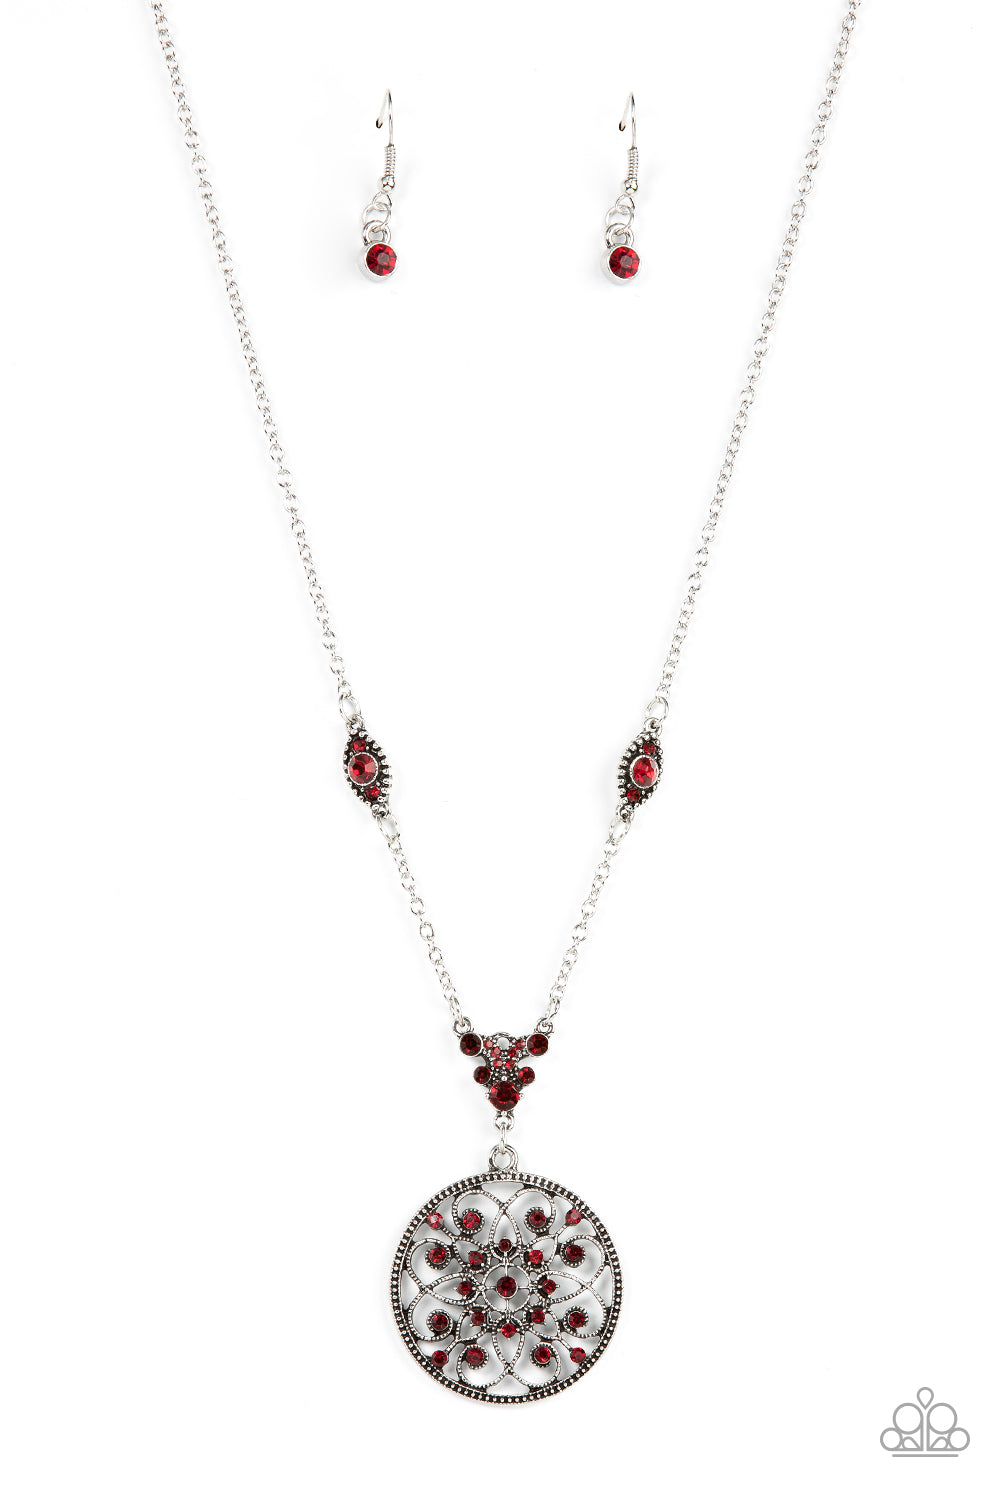 TIMELESS Traveler - Red and Silver Fashion Necklace - Paparazzi Accessories - Glittery red rhinestones are sprinkled across a silver floral frame, creating a timeless pendant at the bottom of a dainty silver chain that has been enhanced with matching red rhinestone embellished frames. Features an adjustable clasp closure. Trendy fashion jewelry for everyone -